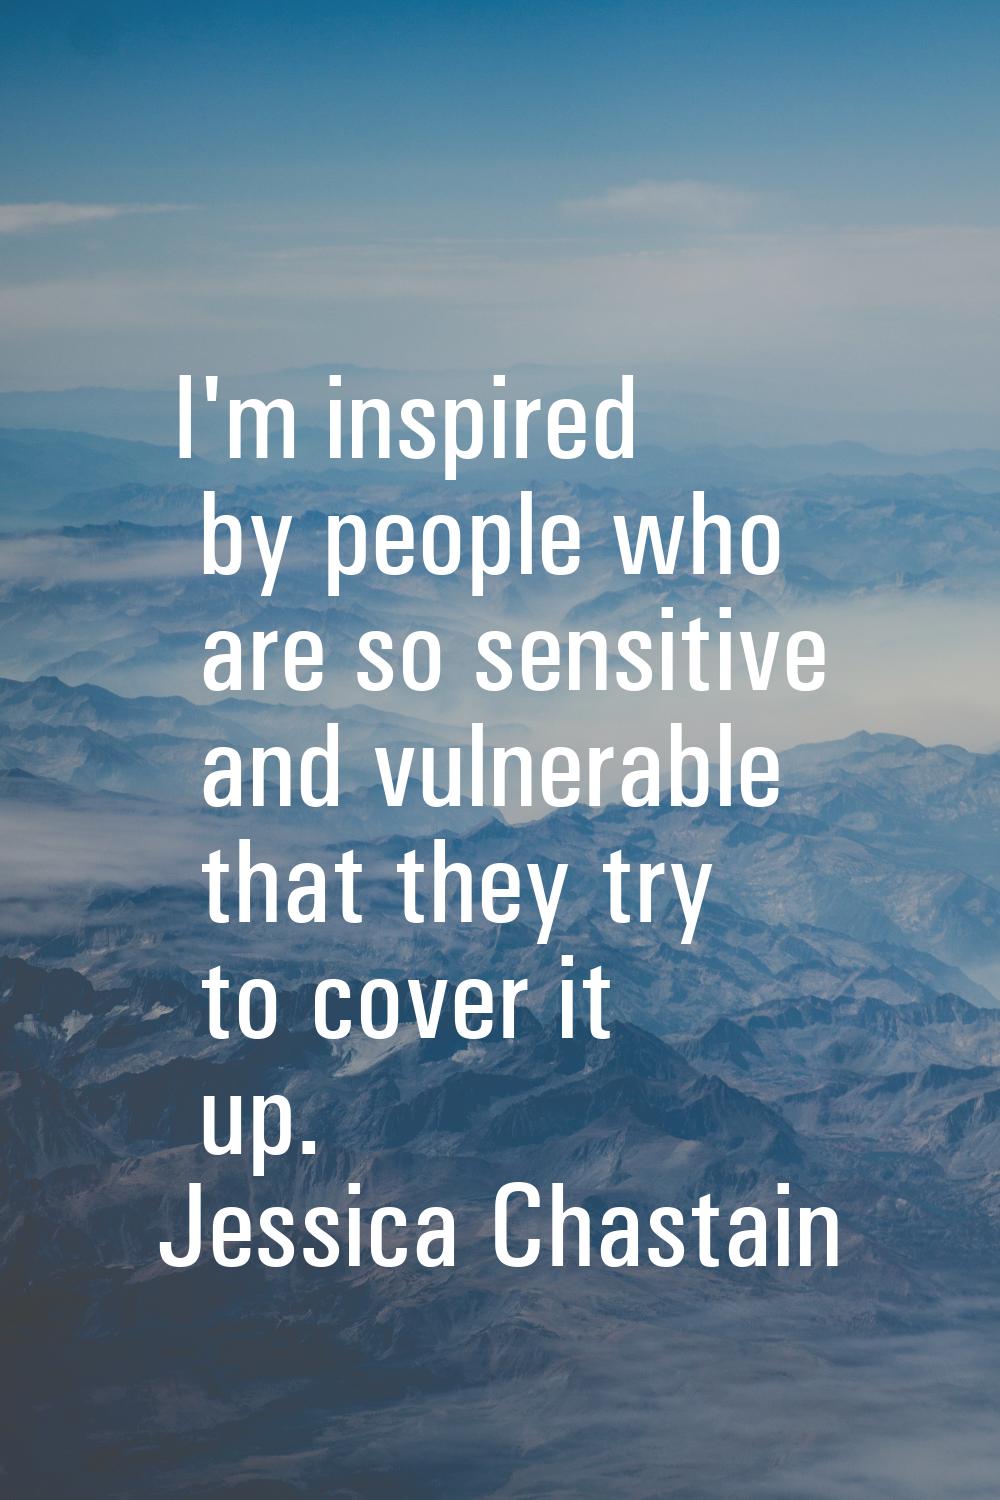 I'm inspired by people who are so sensitive and vulnerable that they try to cover it up.